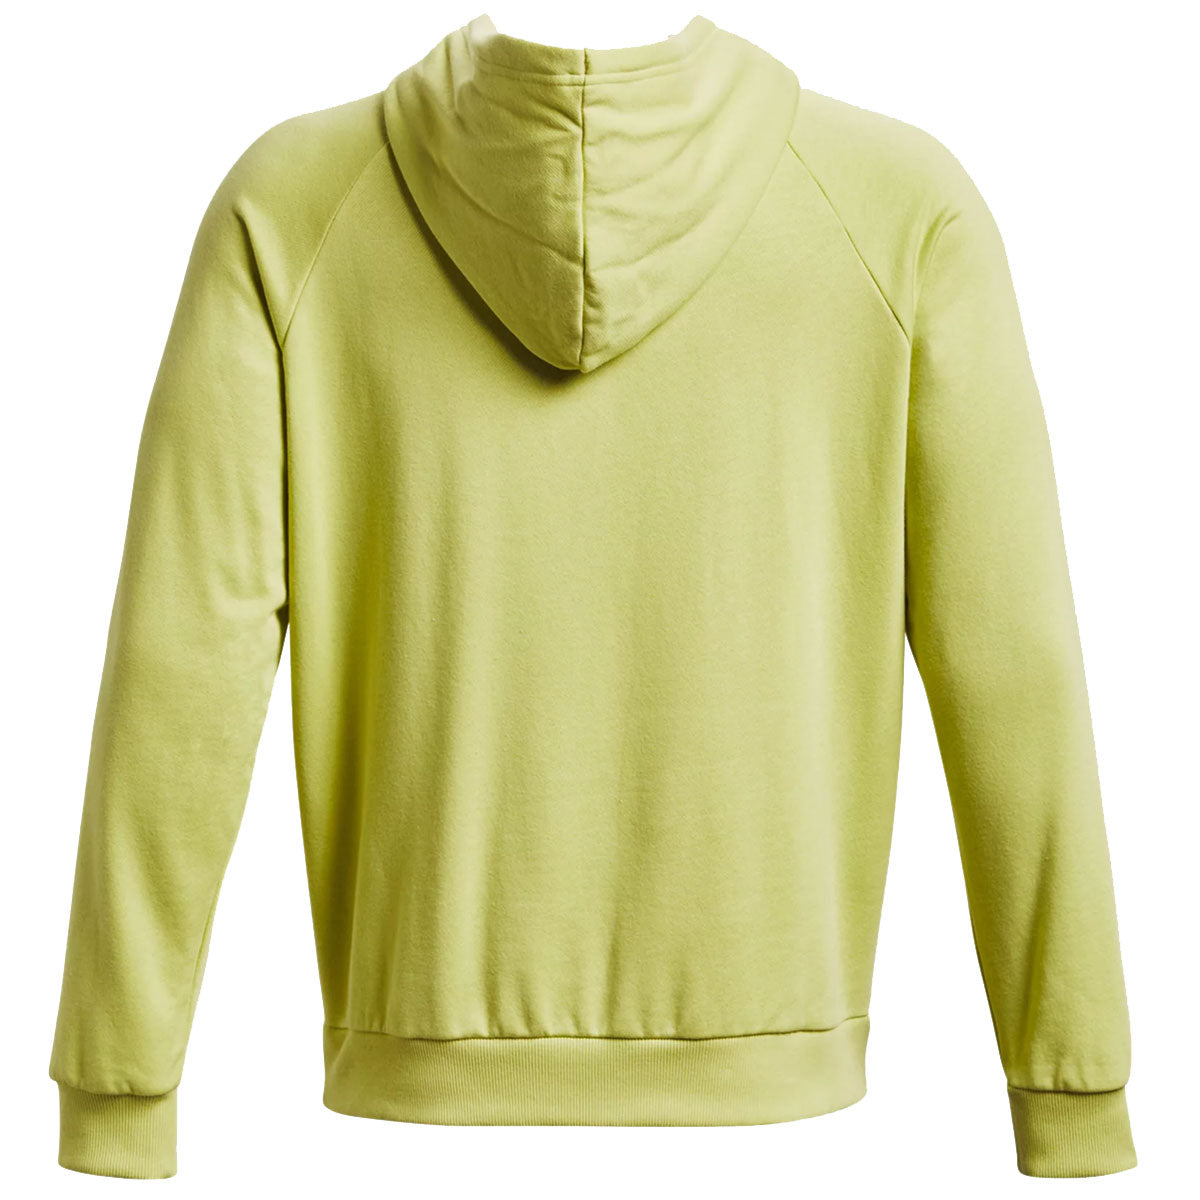 Under Armour Rival Fleece Hoodie - Mens - Lime Yellow/White